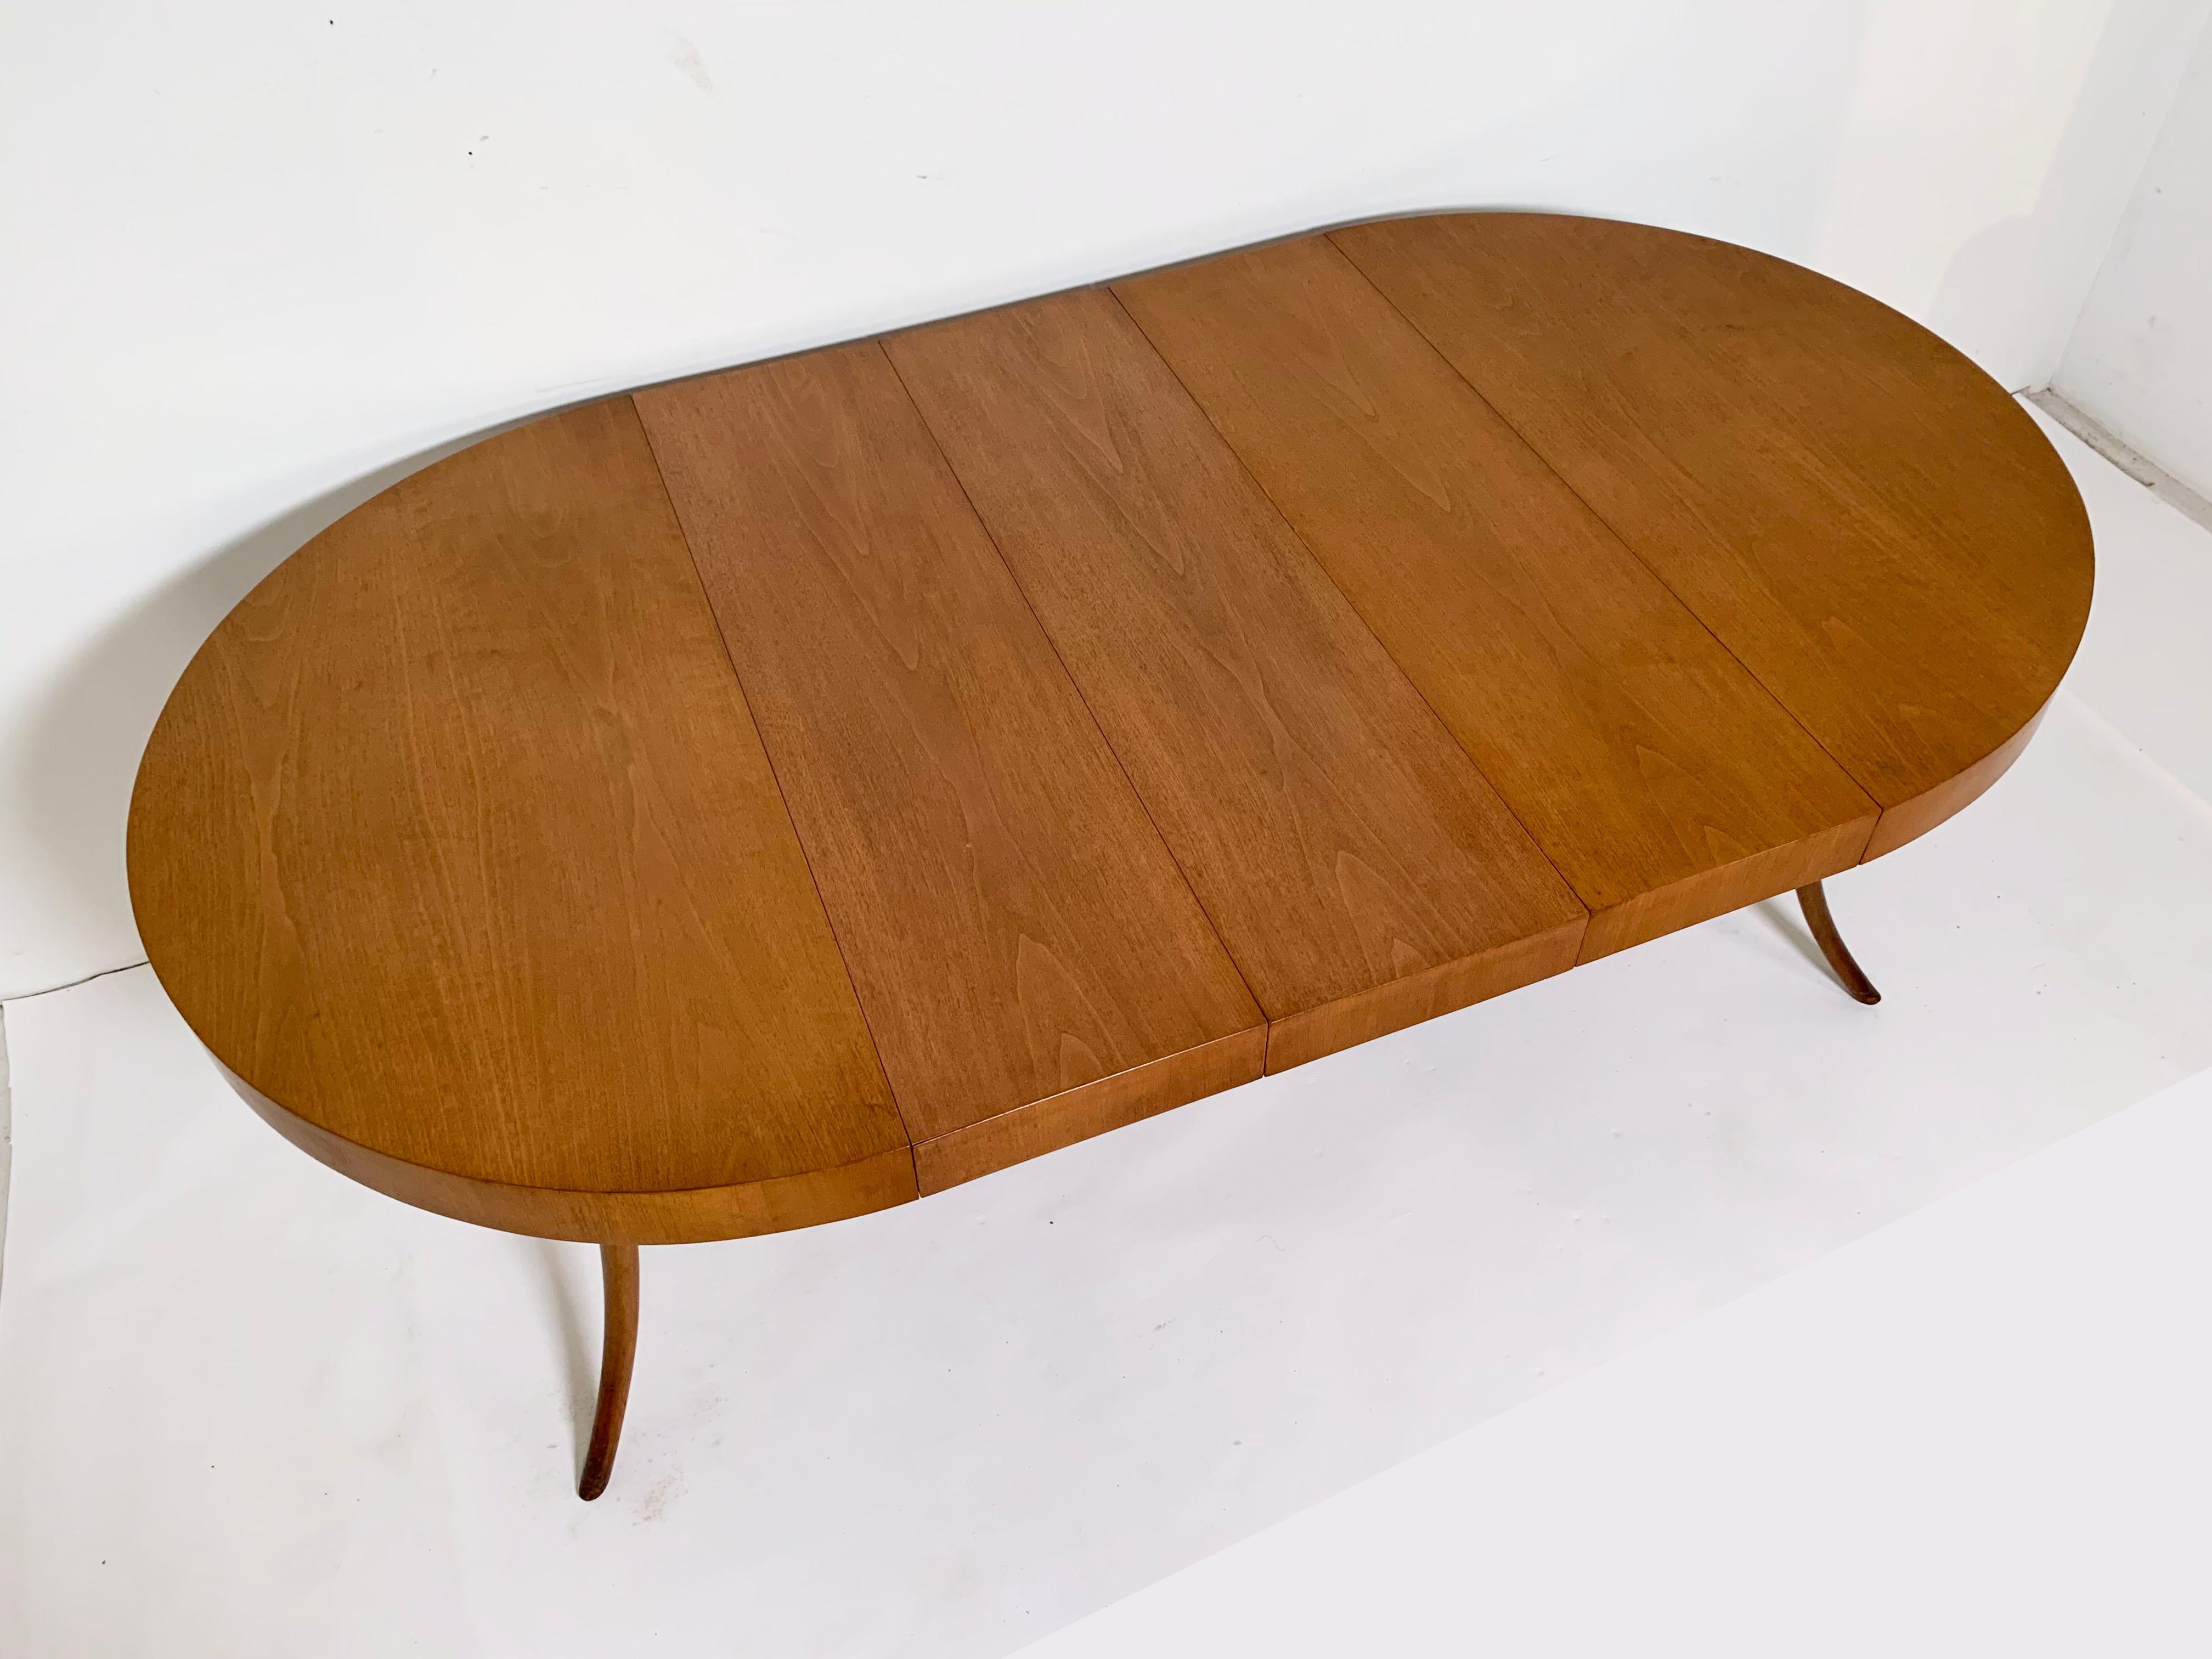 Mid-20th Century T.H. Robsjohn-Gibbings Widdicomb Saber Leg Round Dining Table with Three Leaves